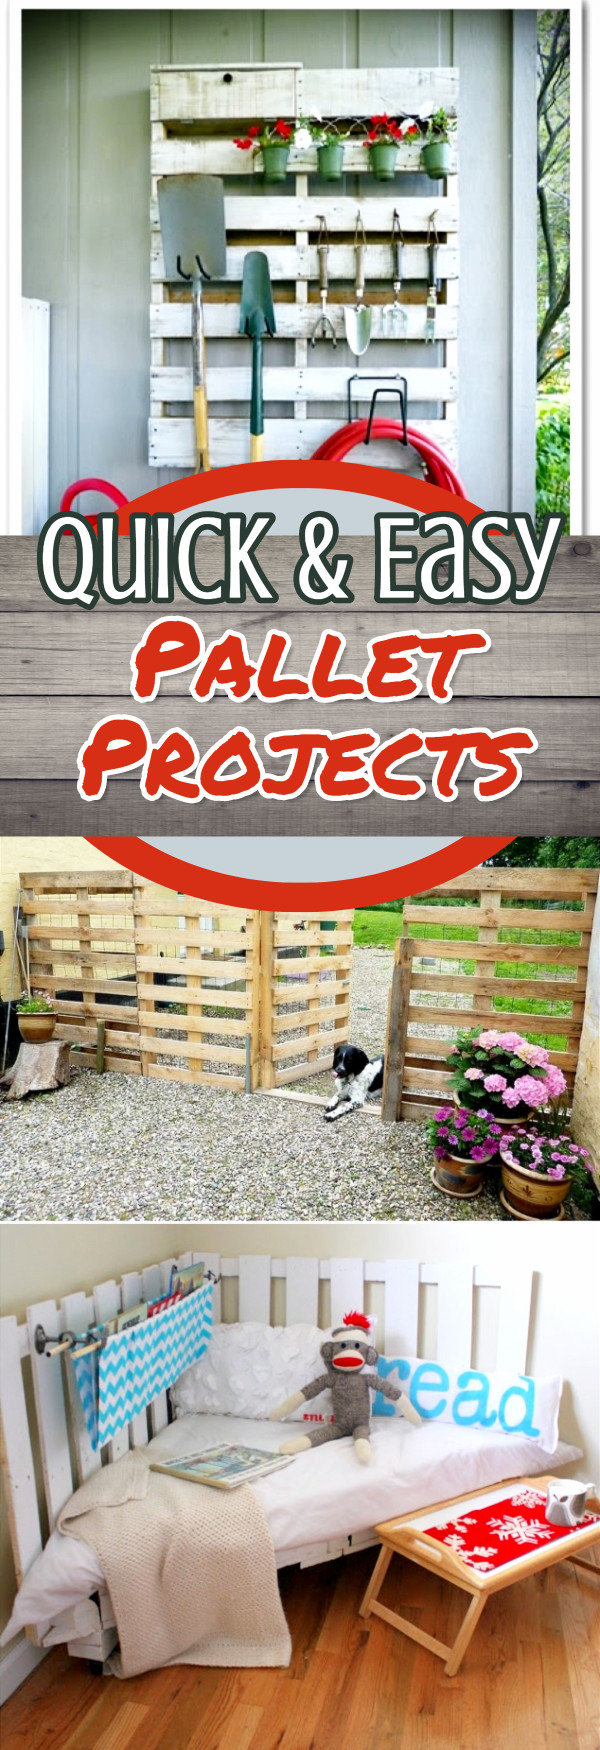 Pallet Ideas and Pallet Projects - Easy DIY Pallet Projects with Instructions - Unique Pallet Ideas To Make